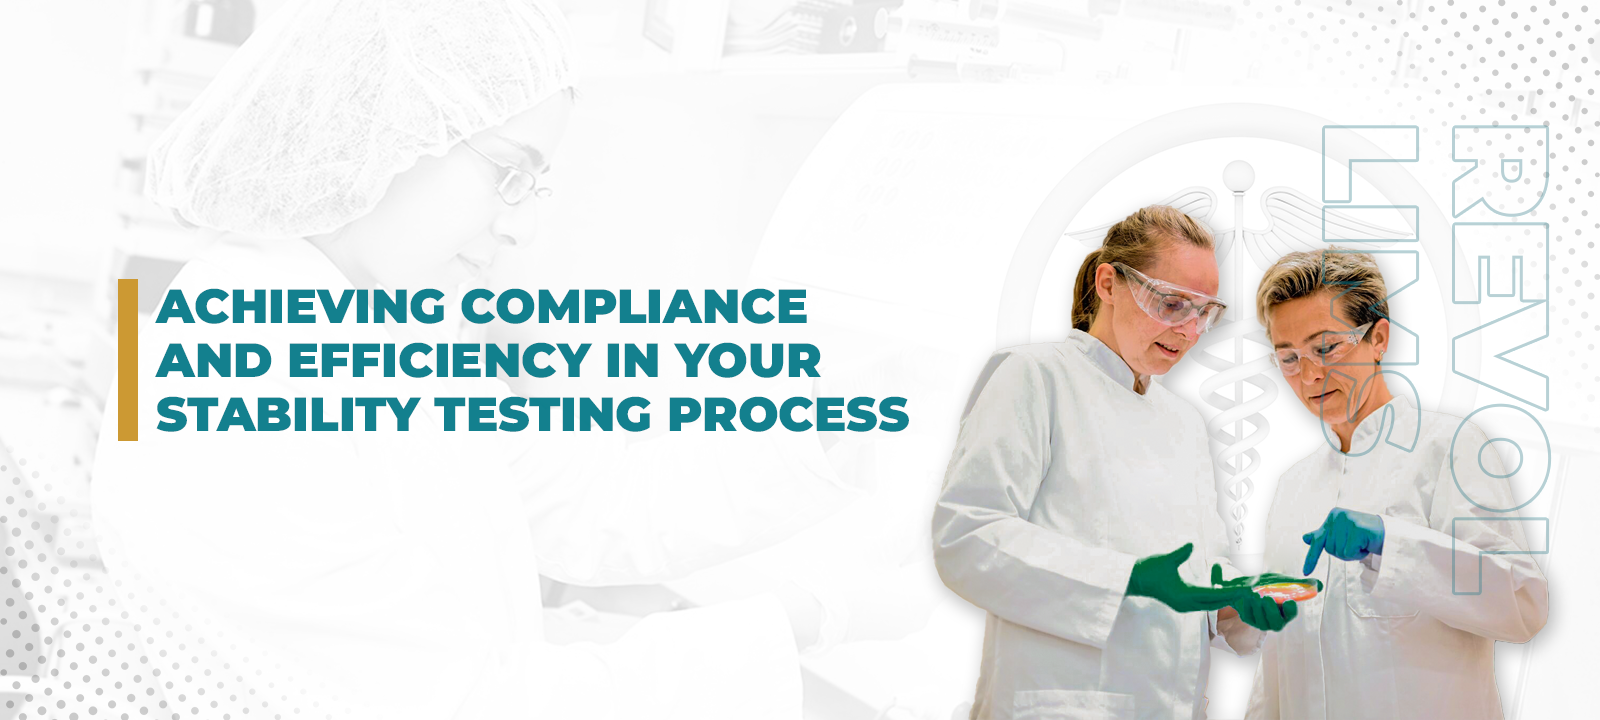 two images of scientists working in labs, one in black and white and one in color, with the text achieving compliance and efficiency in your stability testing process.